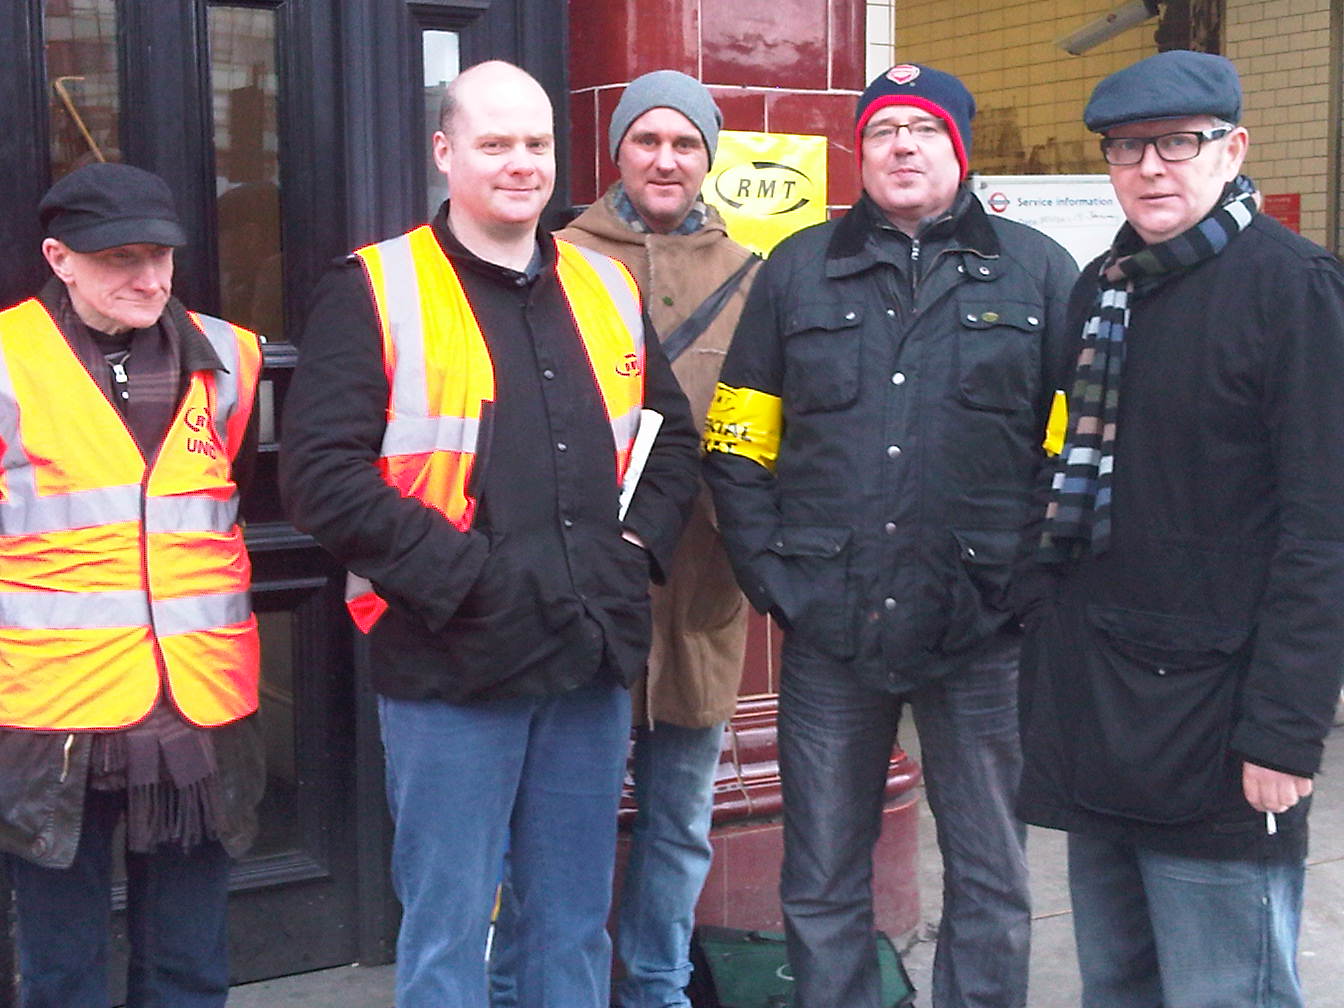 elephant and castle picket